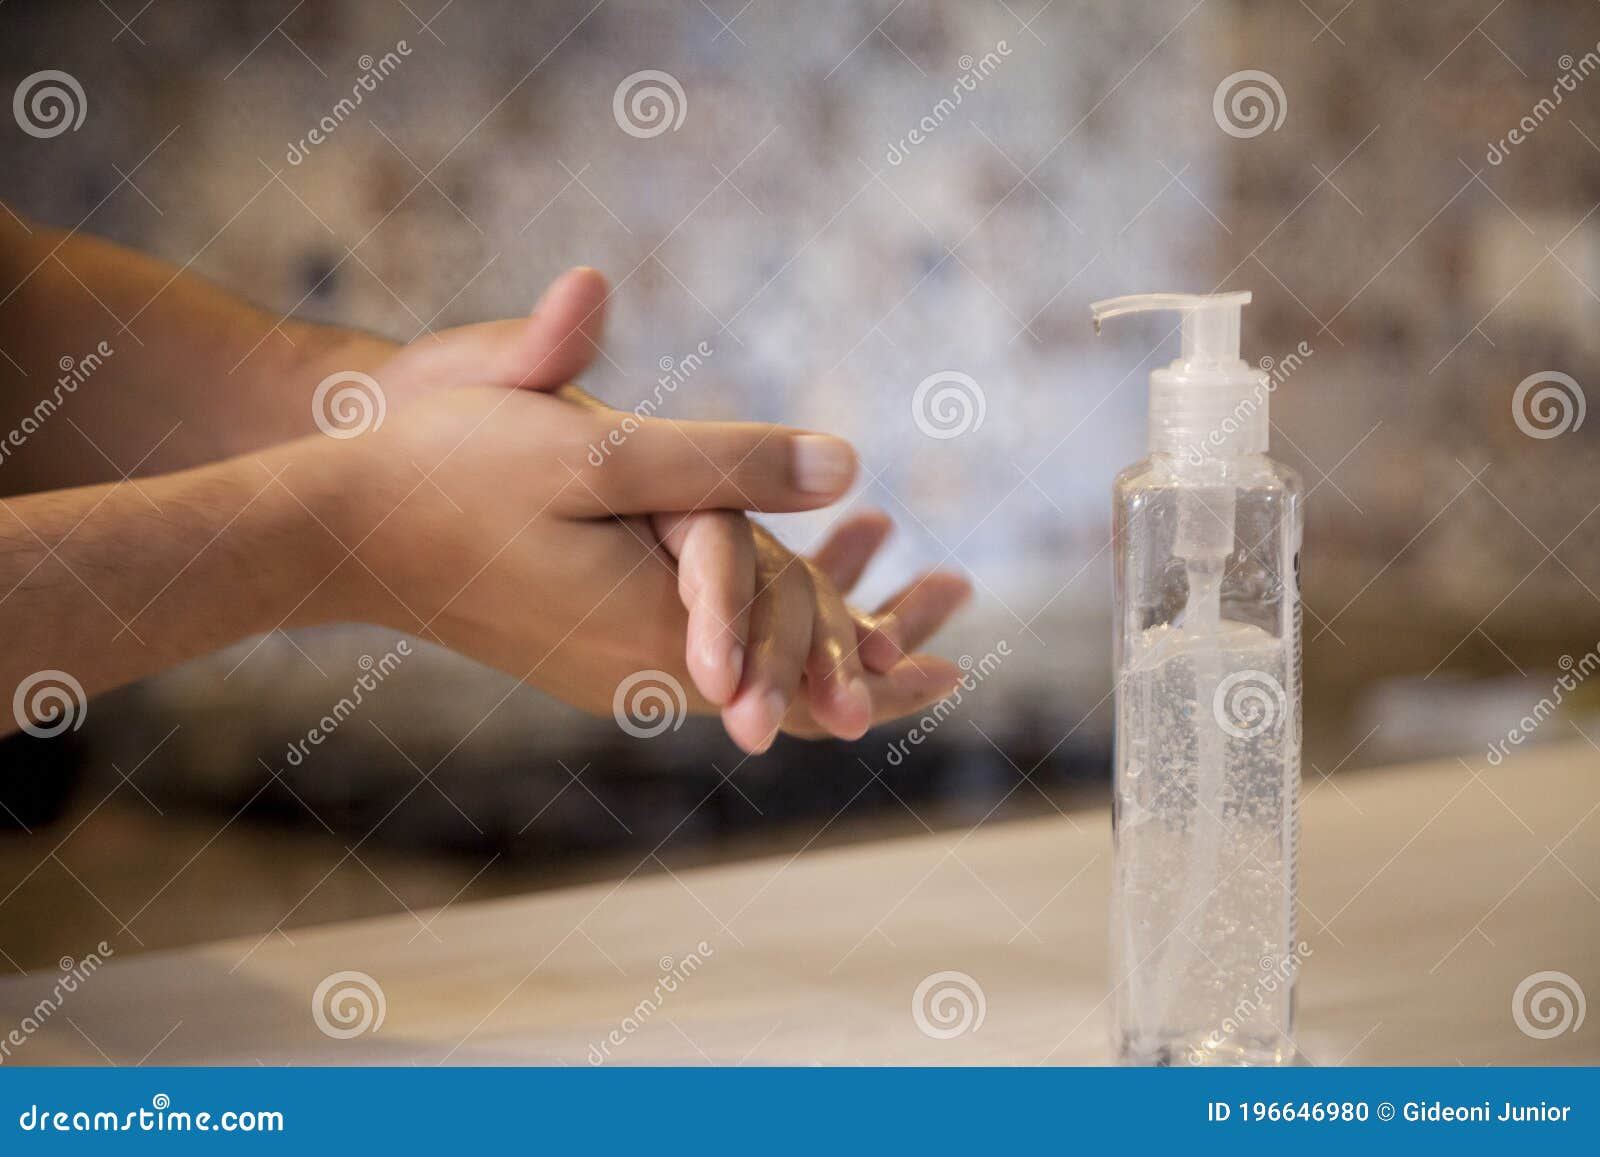  rubbing alcohol gel on the hands